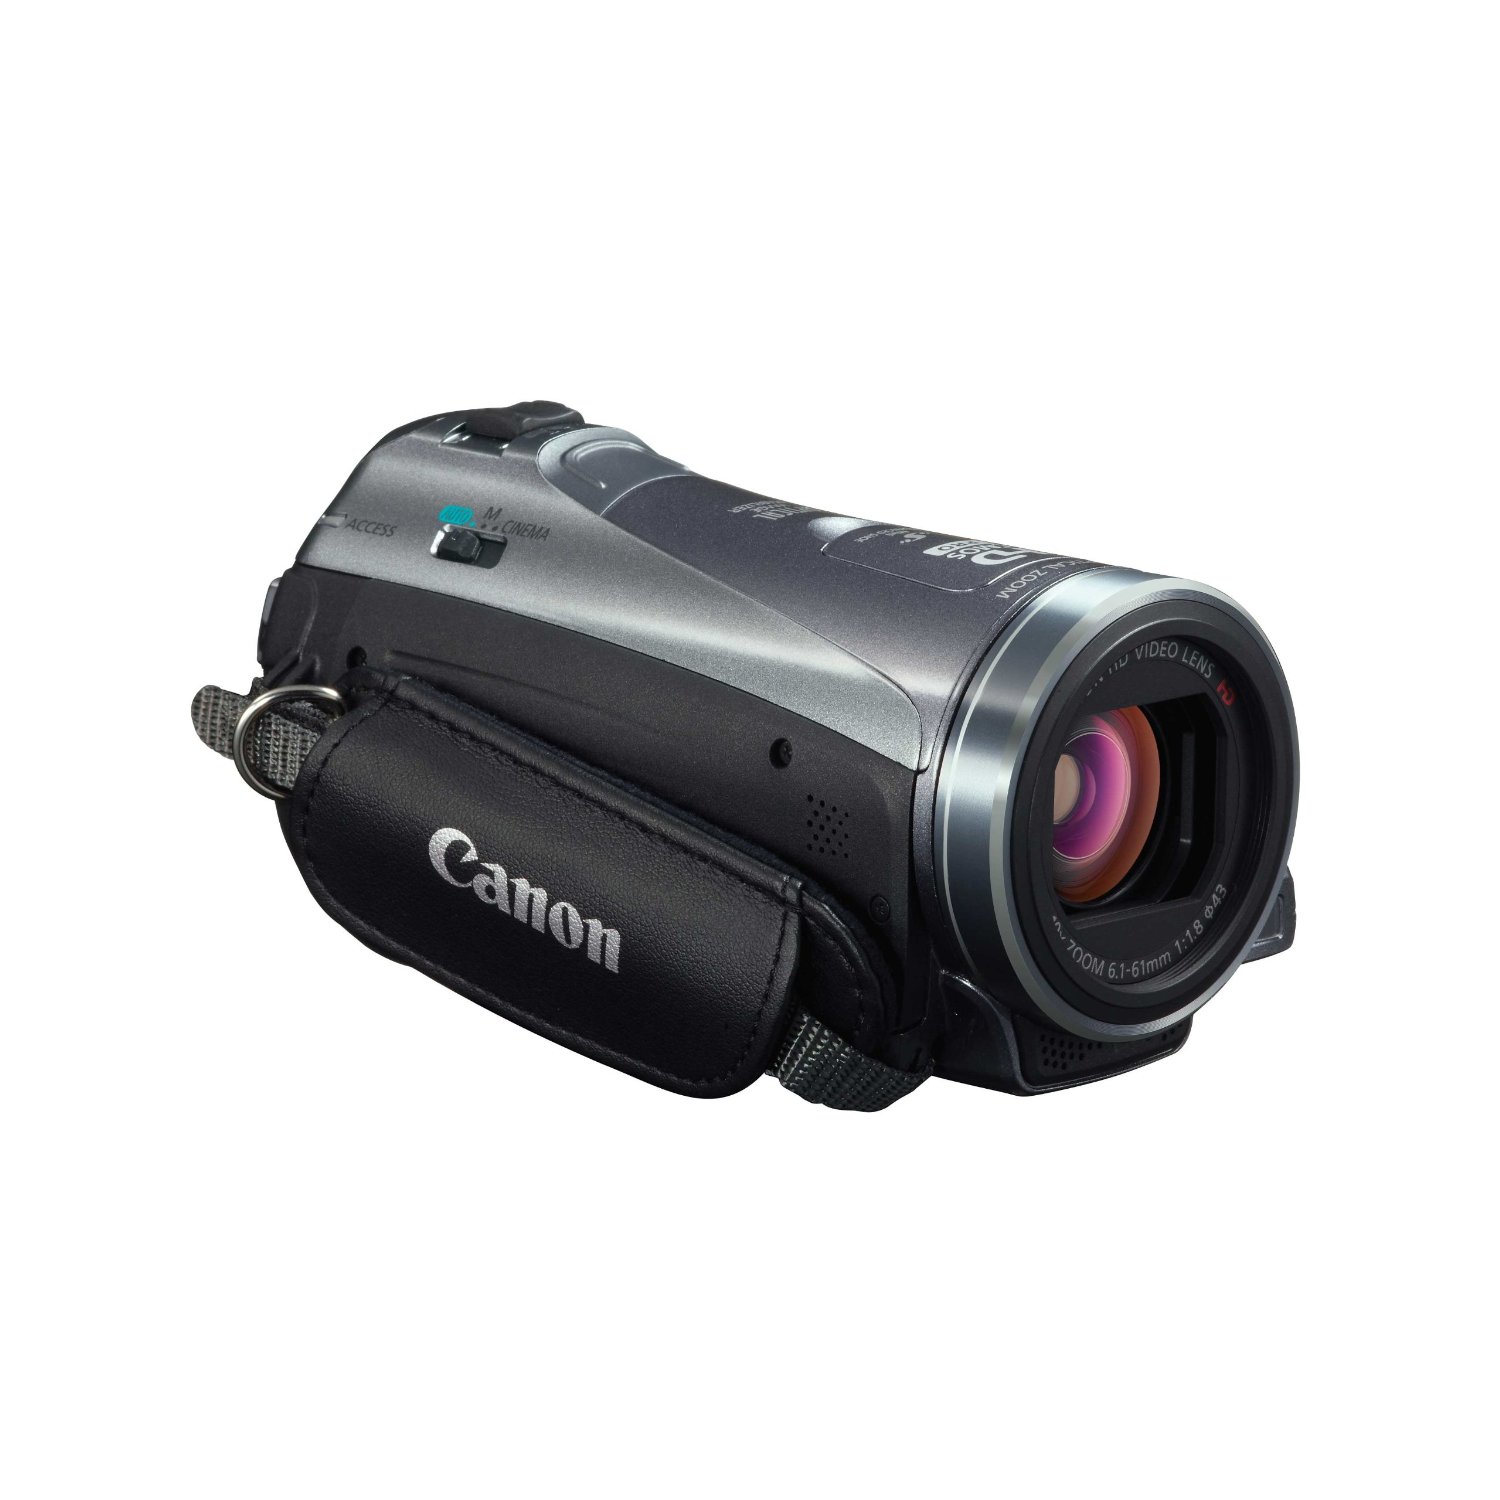 http://thetechjournal.com/wp-content/uploads/images/1111/1320517872-canon-vixia-hf-m400-full-hd-camcorder-31.jpg